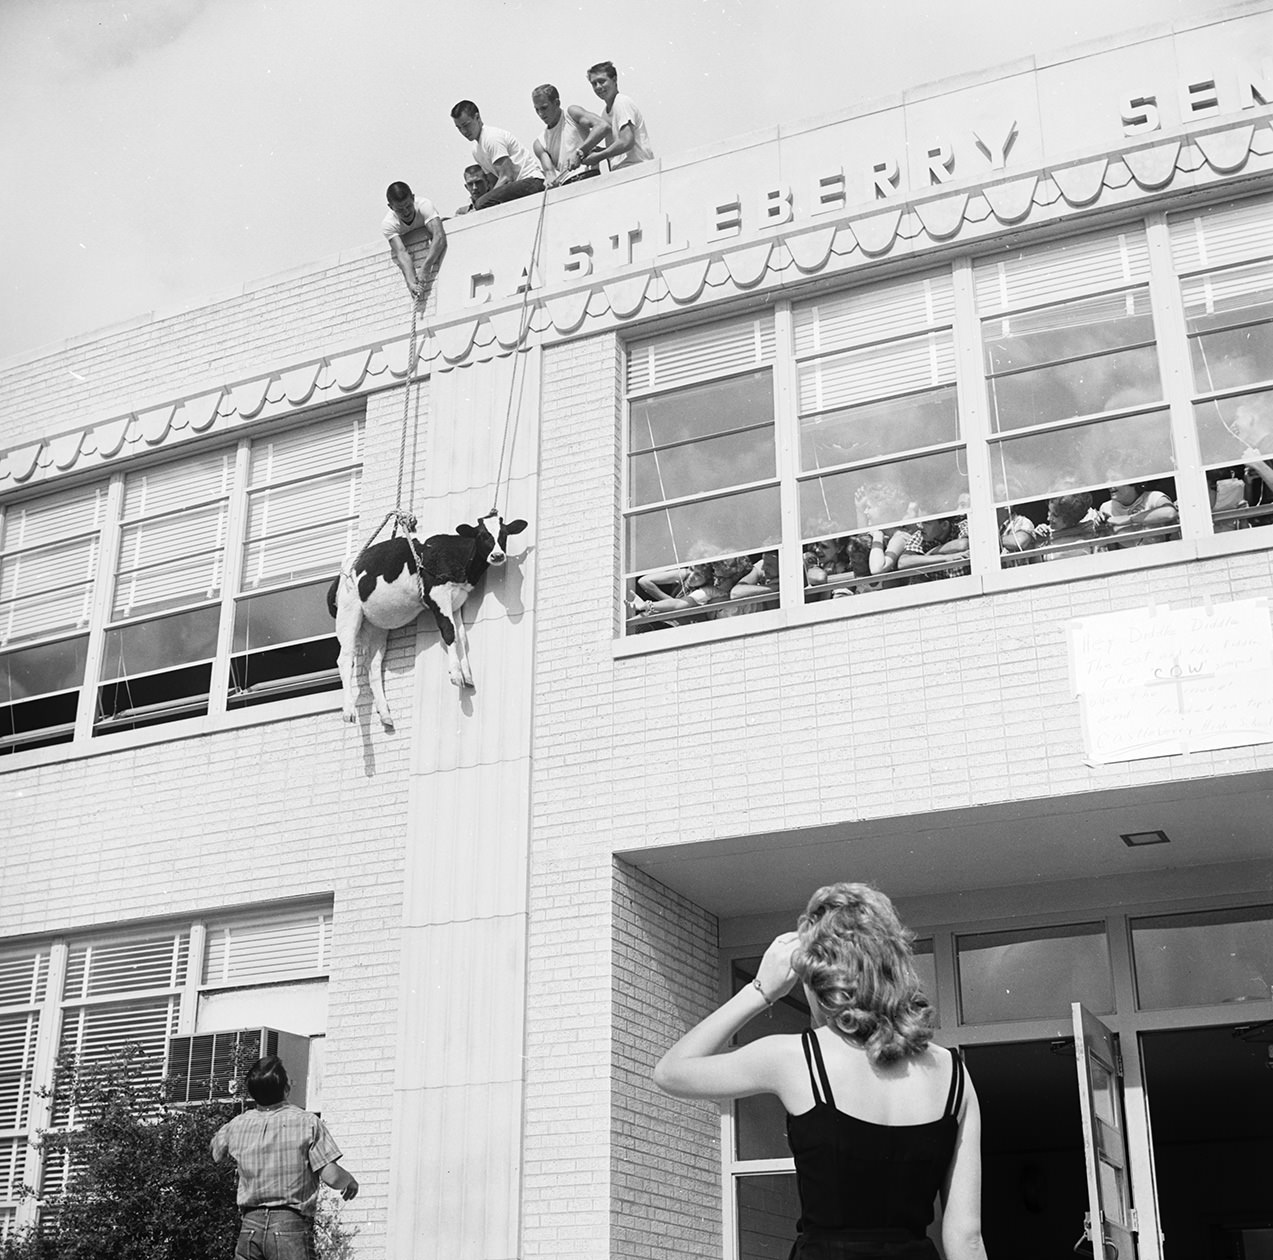 Seniors at Castleberry High School hoist a heifer cow to the roof of the high school building, 1962